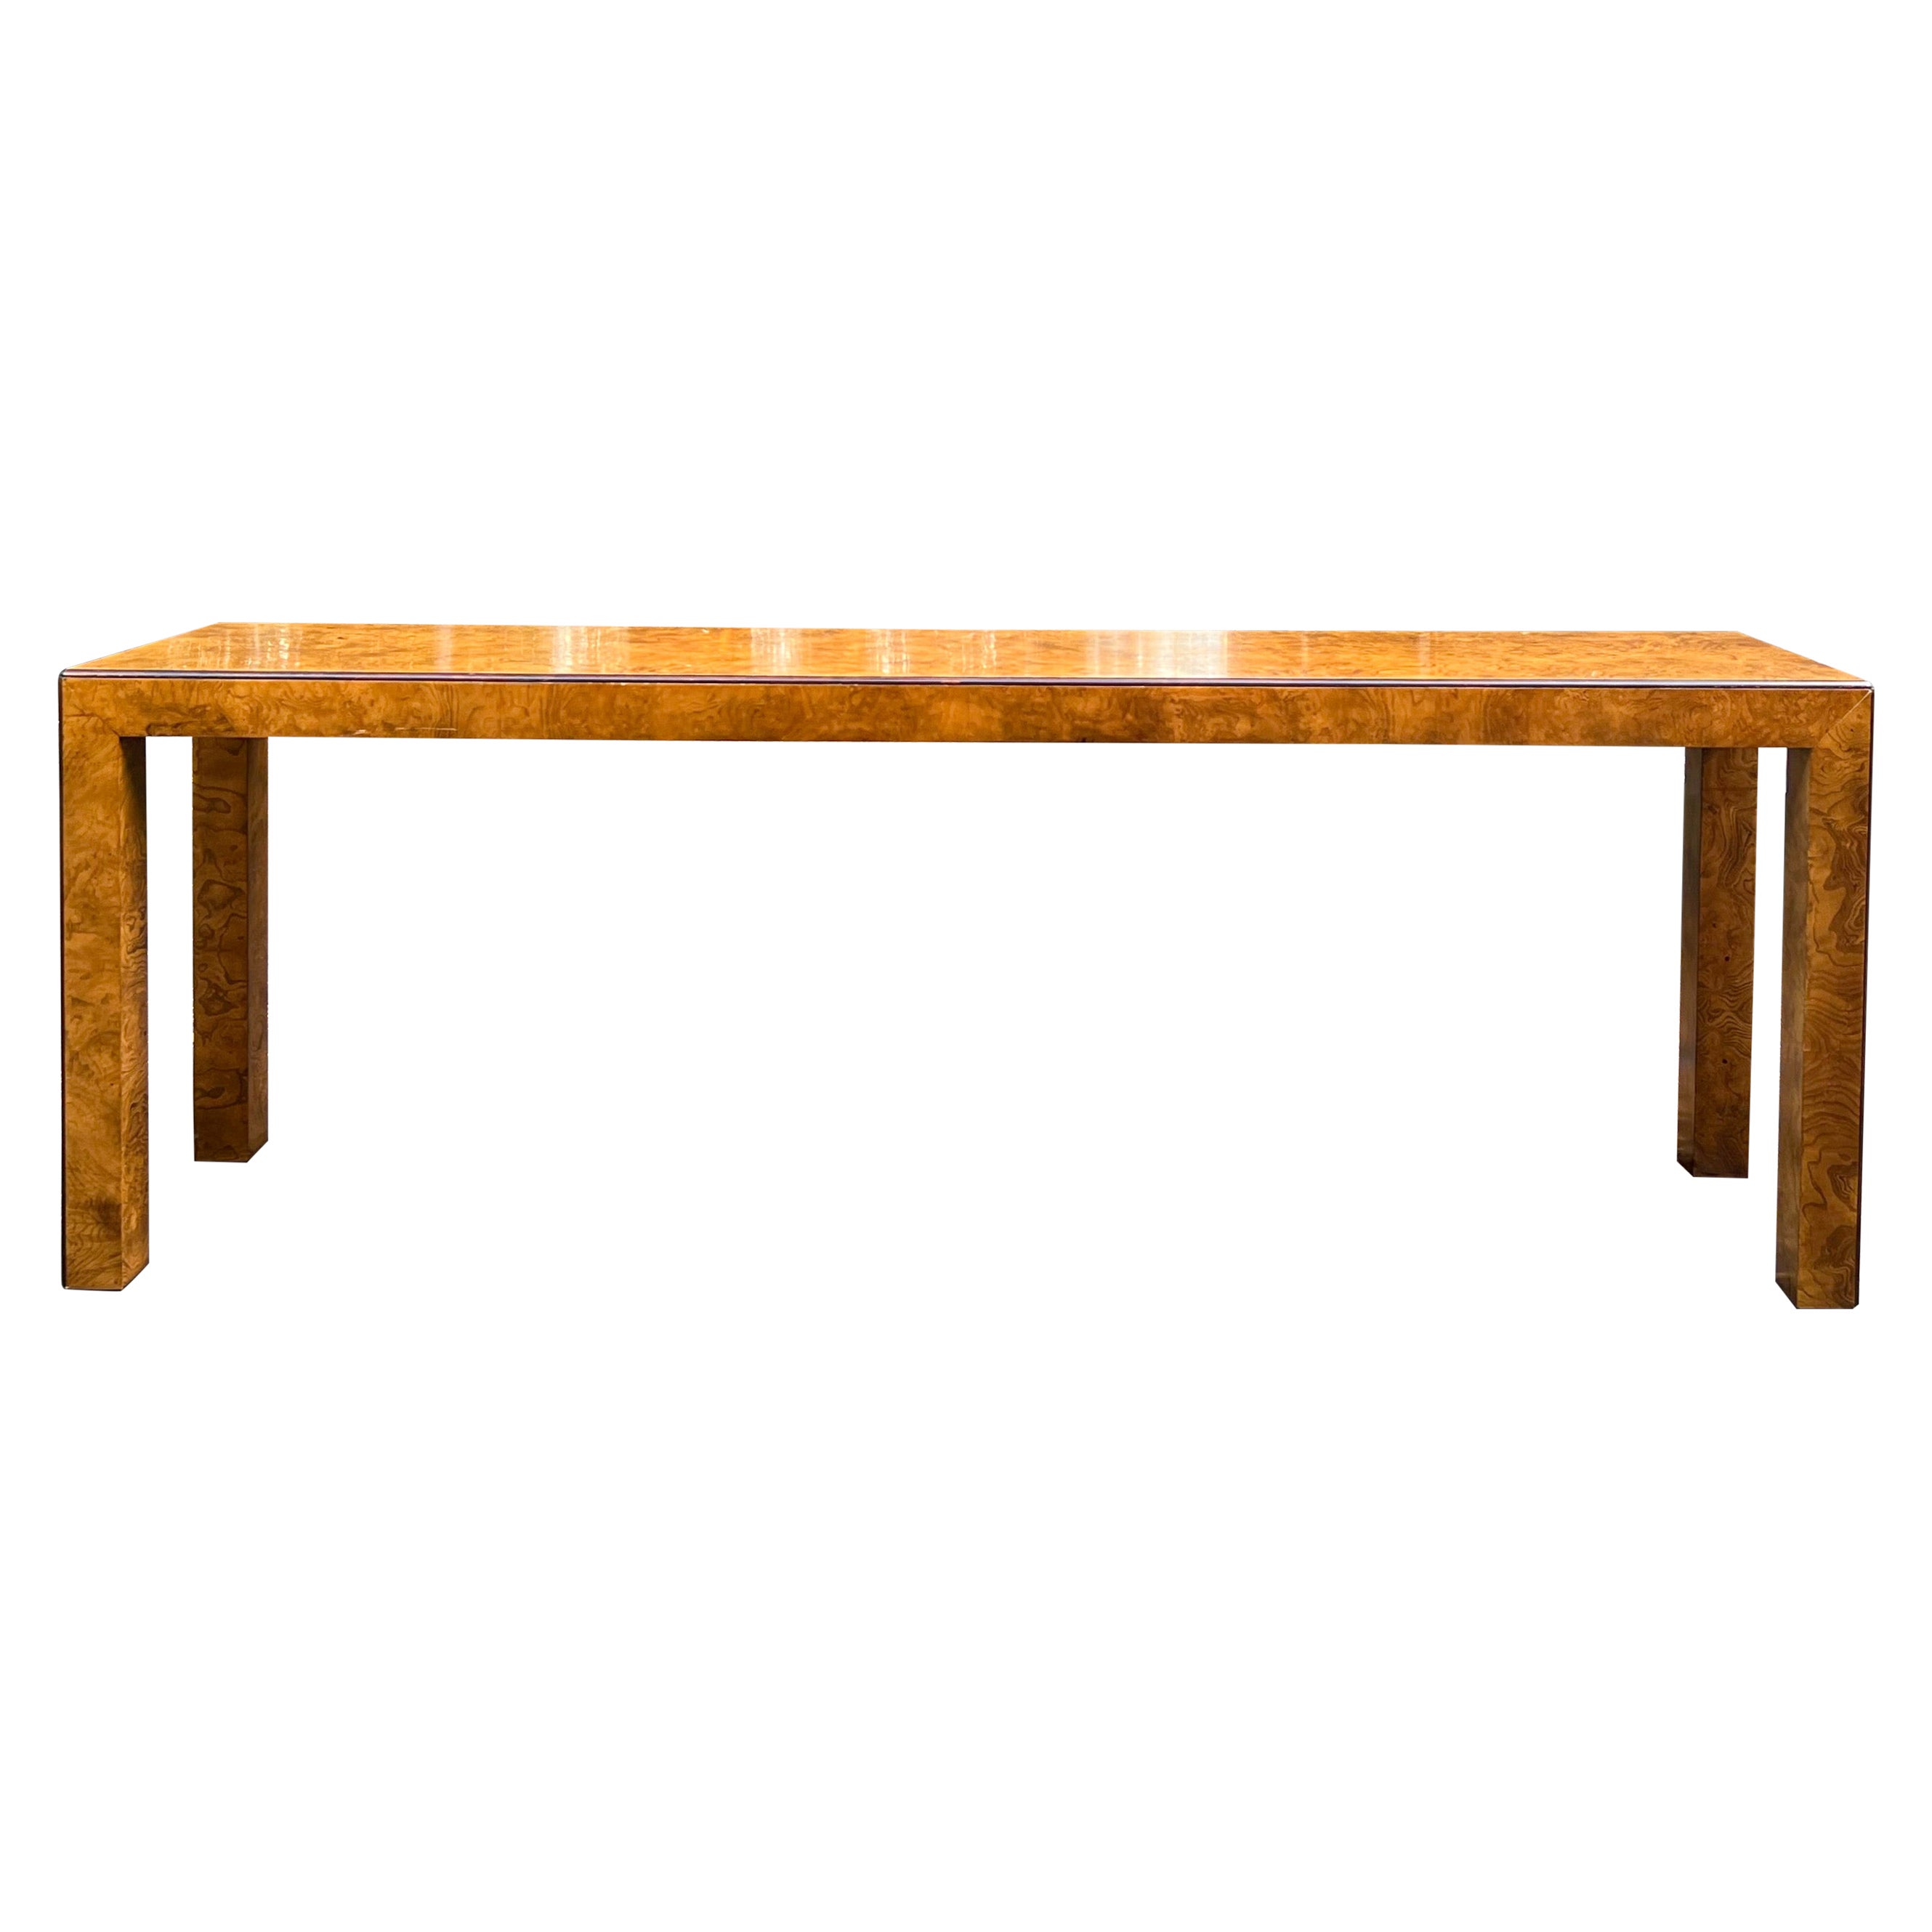 1970s Modern Parsons Style Burl Wood Console Table by John Widdicomb